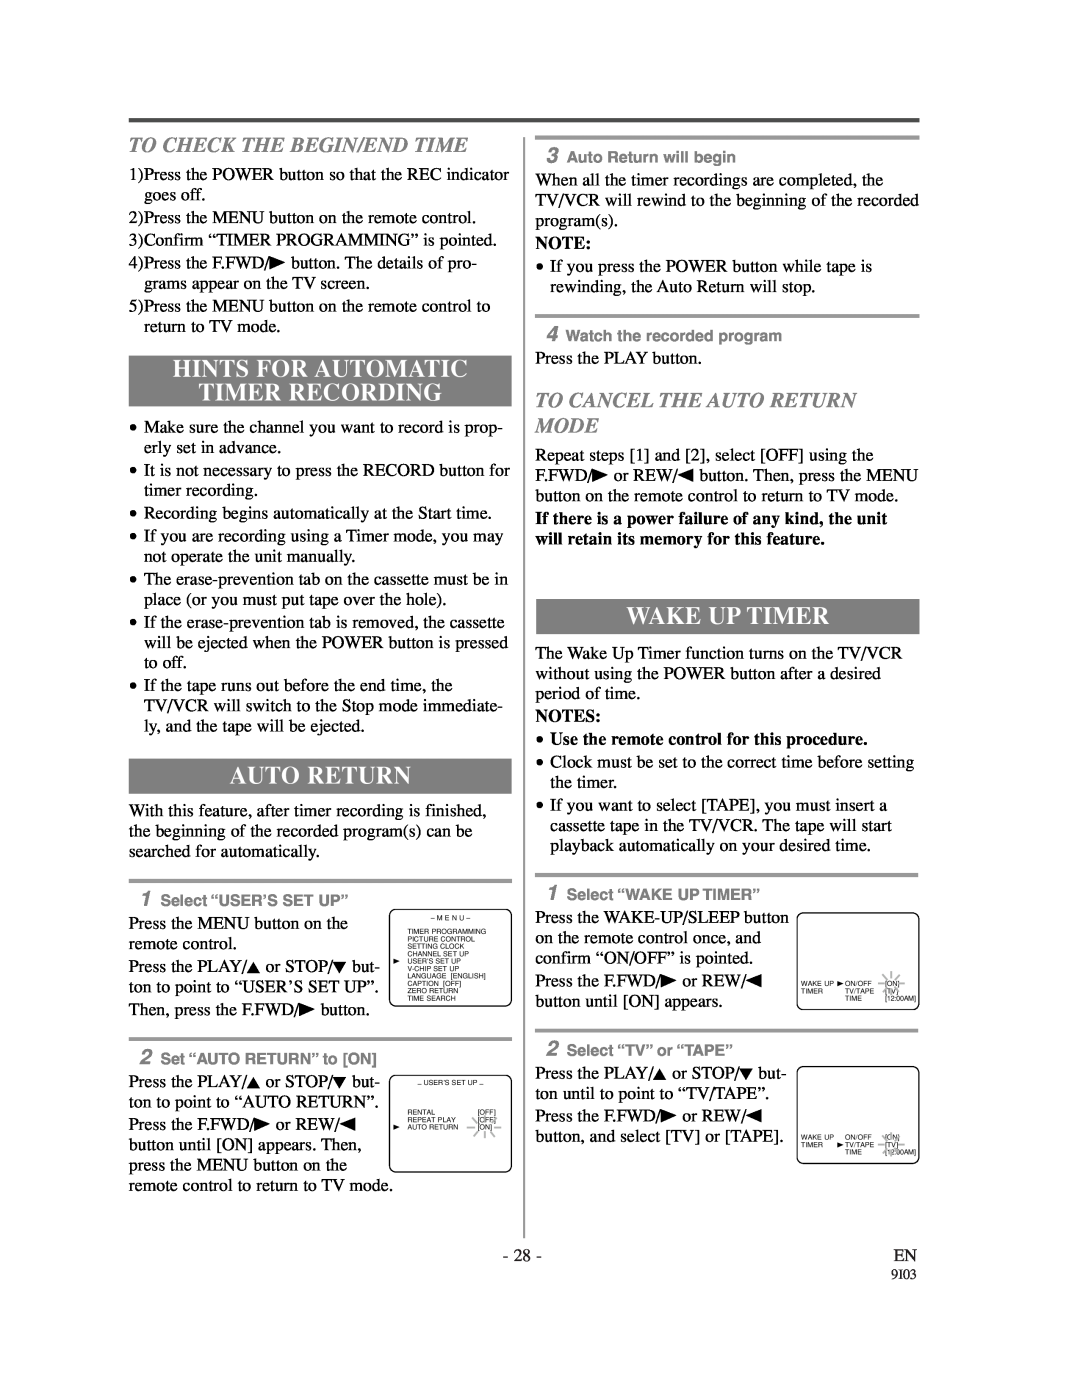 Emerson EC1320C owner manual Hints For Automatic Timer Recording, Auto Return, Wake Up Timer, To Check The Begin/End Time 